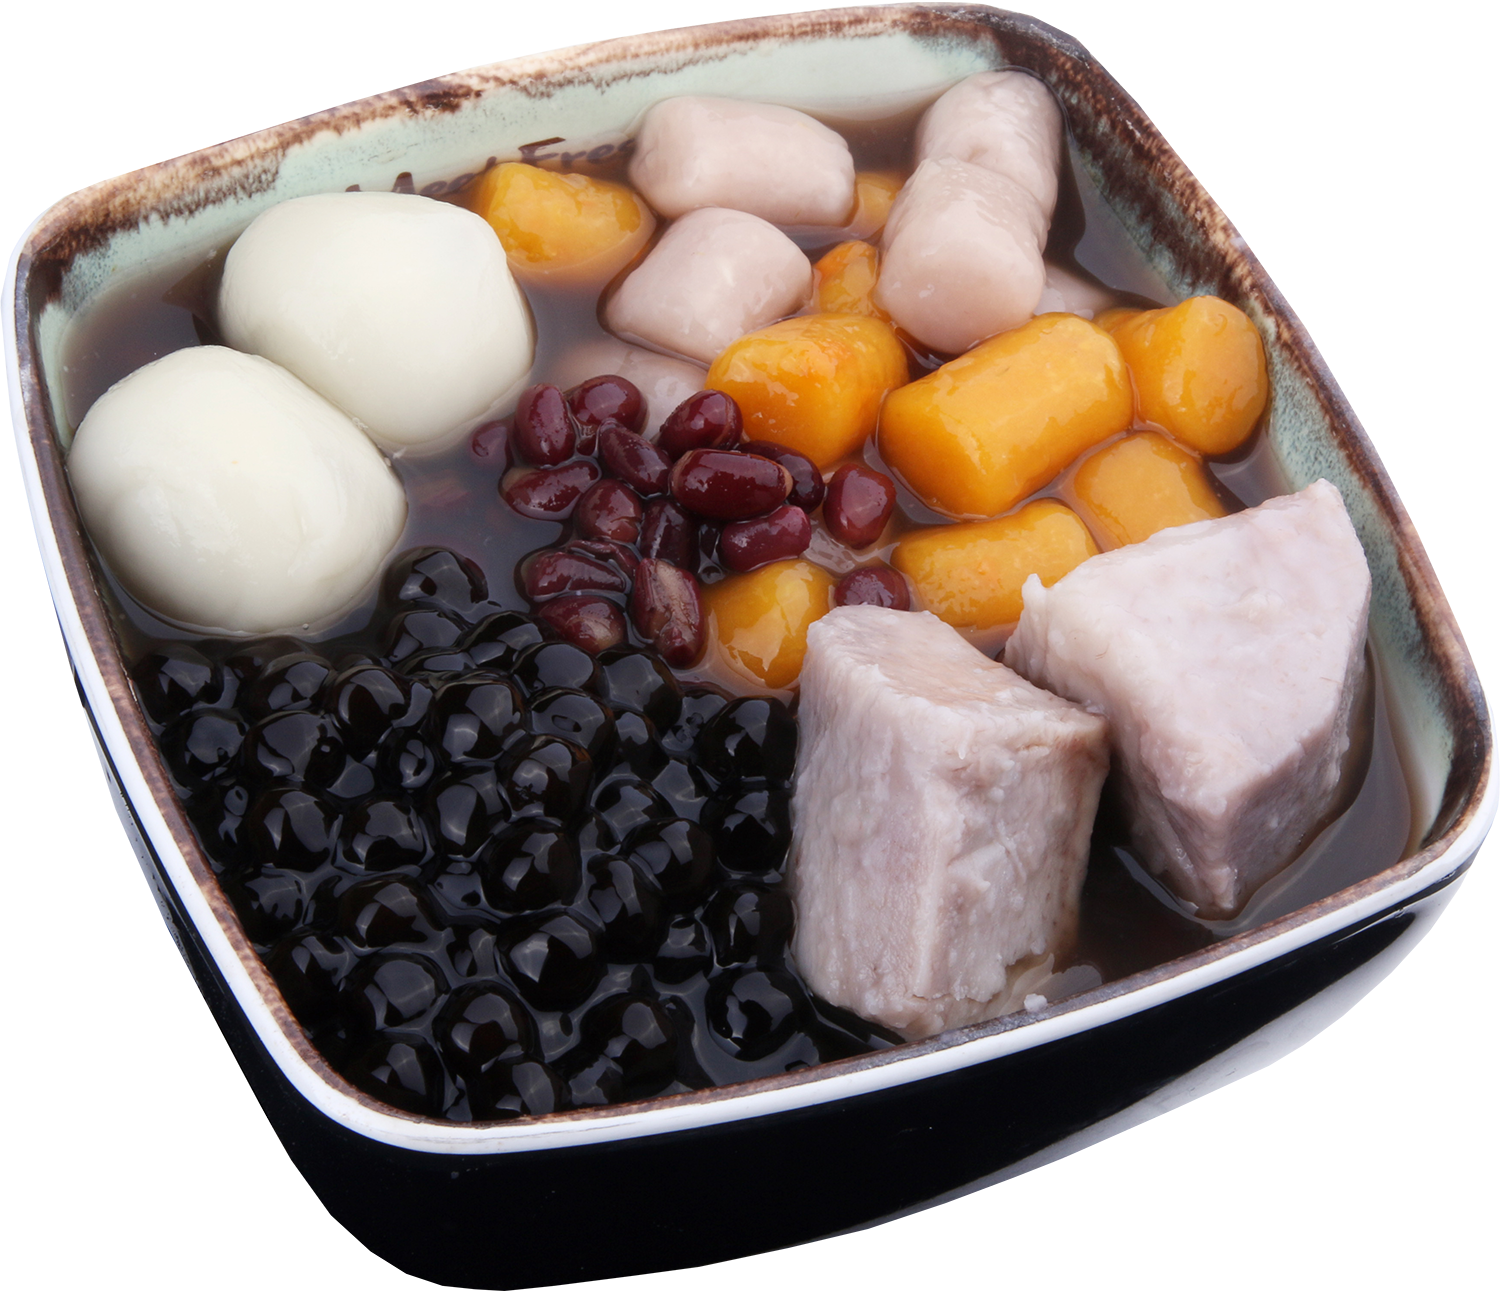 Hot Red Bean Soup Signature - Red Beans, Taro, Sesame Rice Balls, Taro Balls, Boba, Hot Red Bean Soup